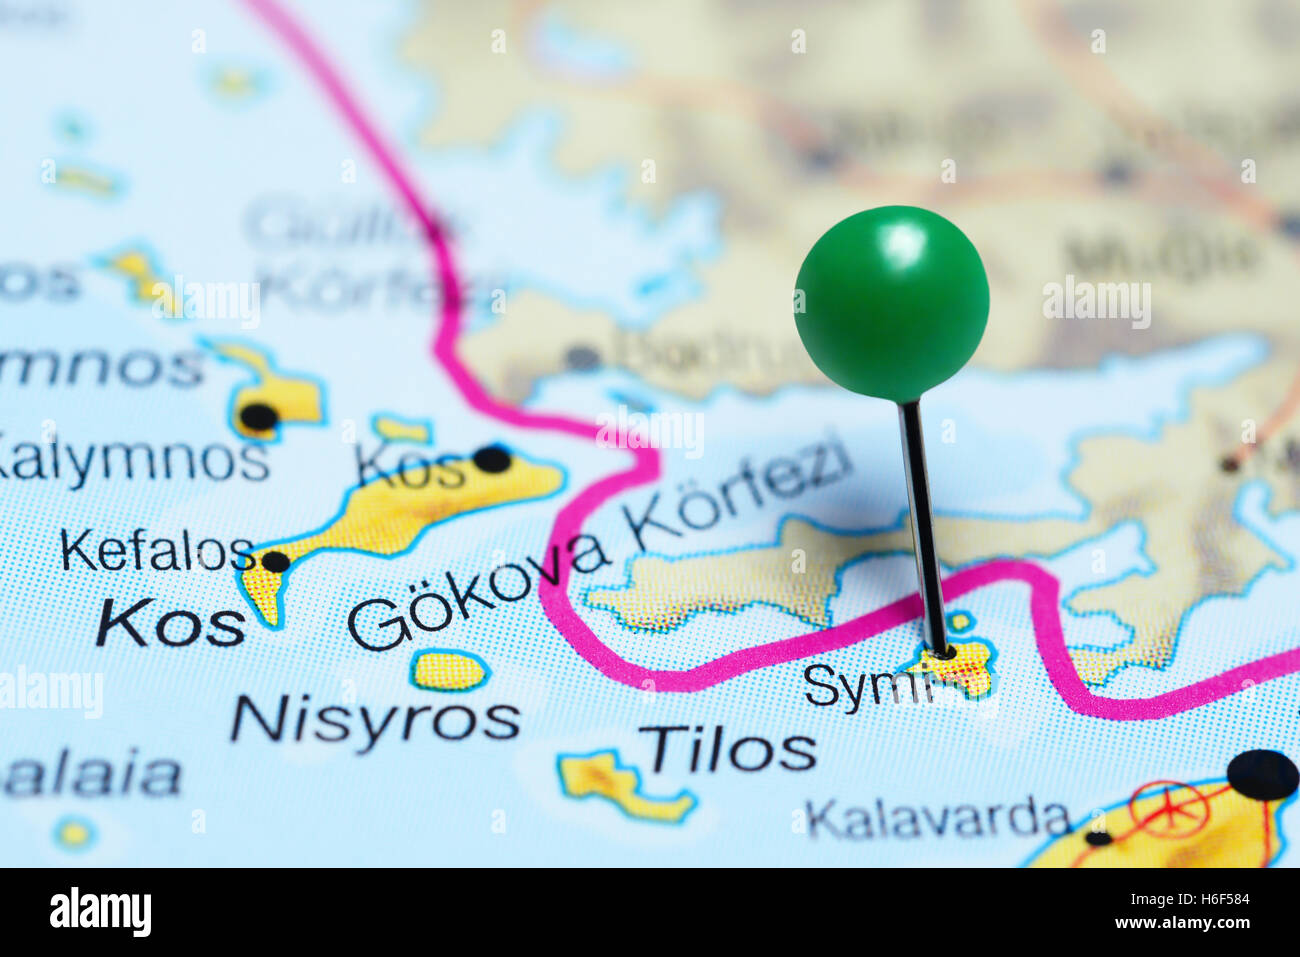 Symi pinned on a map of Greece Stock Photo